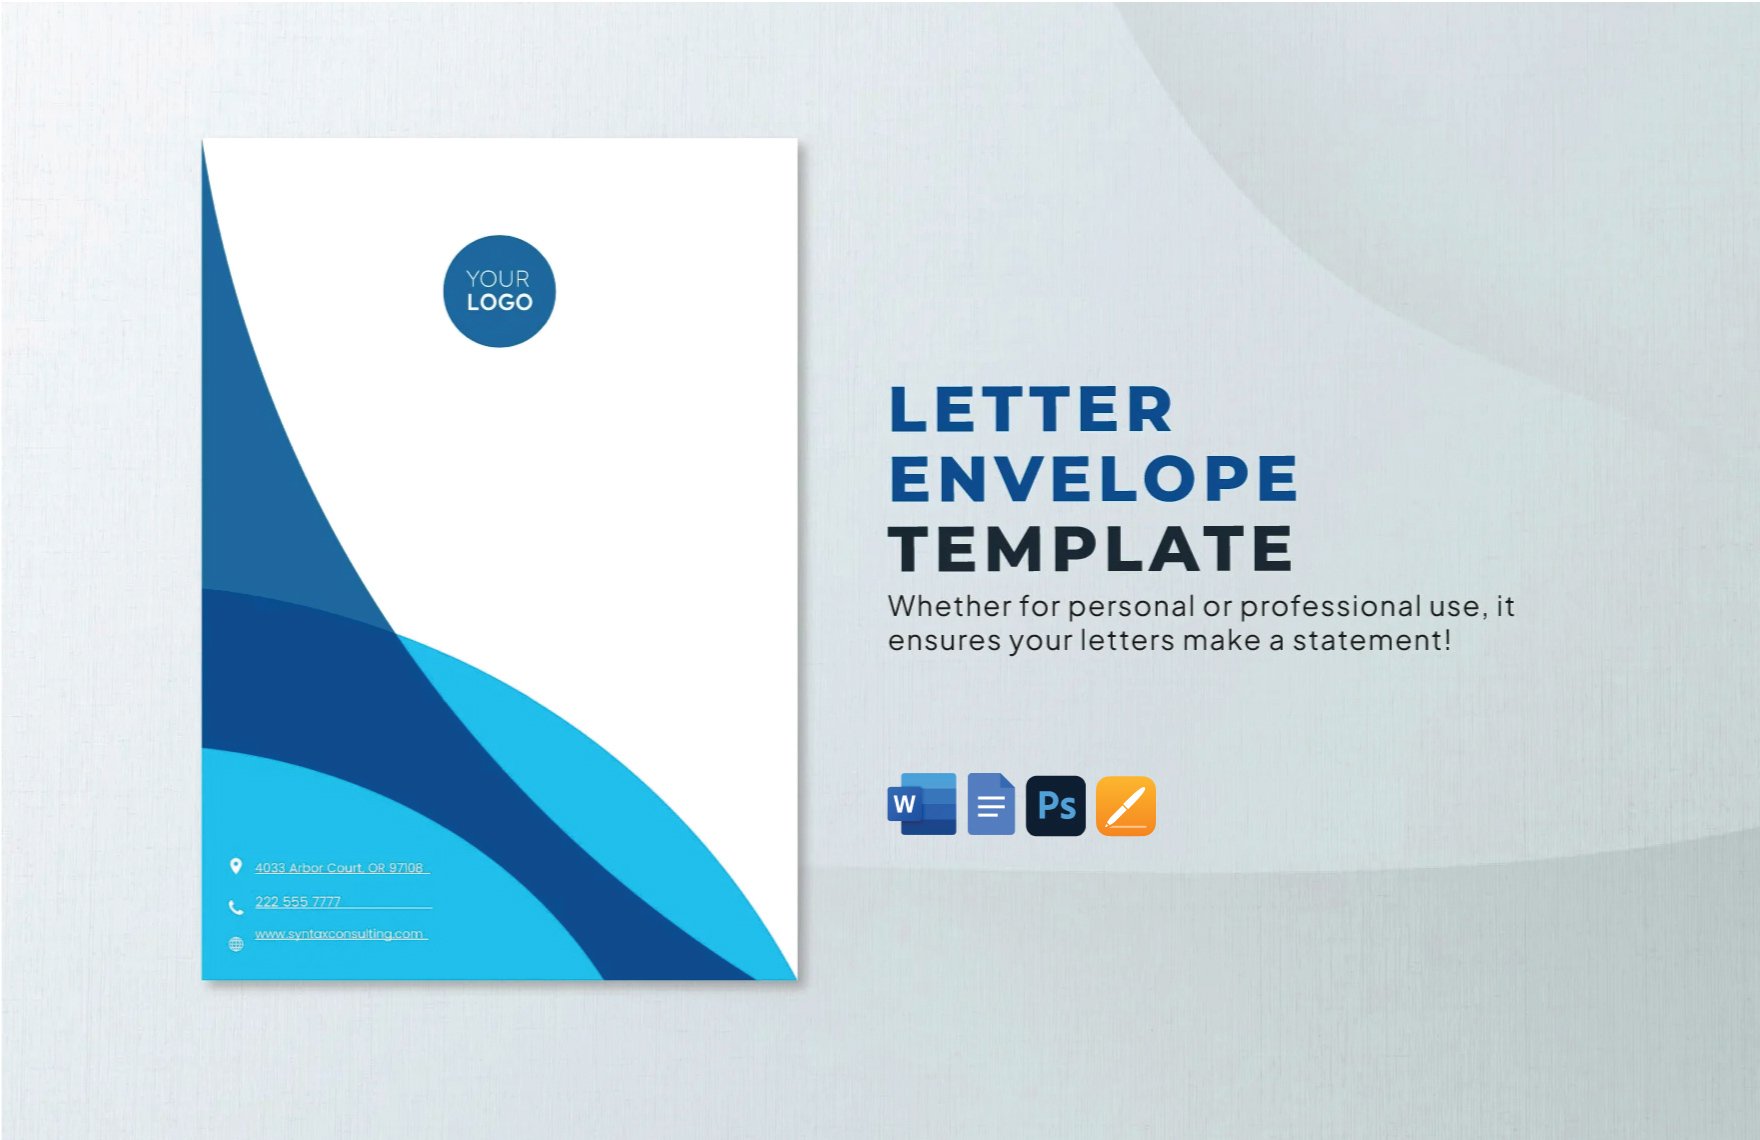 Free Letter Envelope Template in Word, Google Docs, PSD, Apple Pages